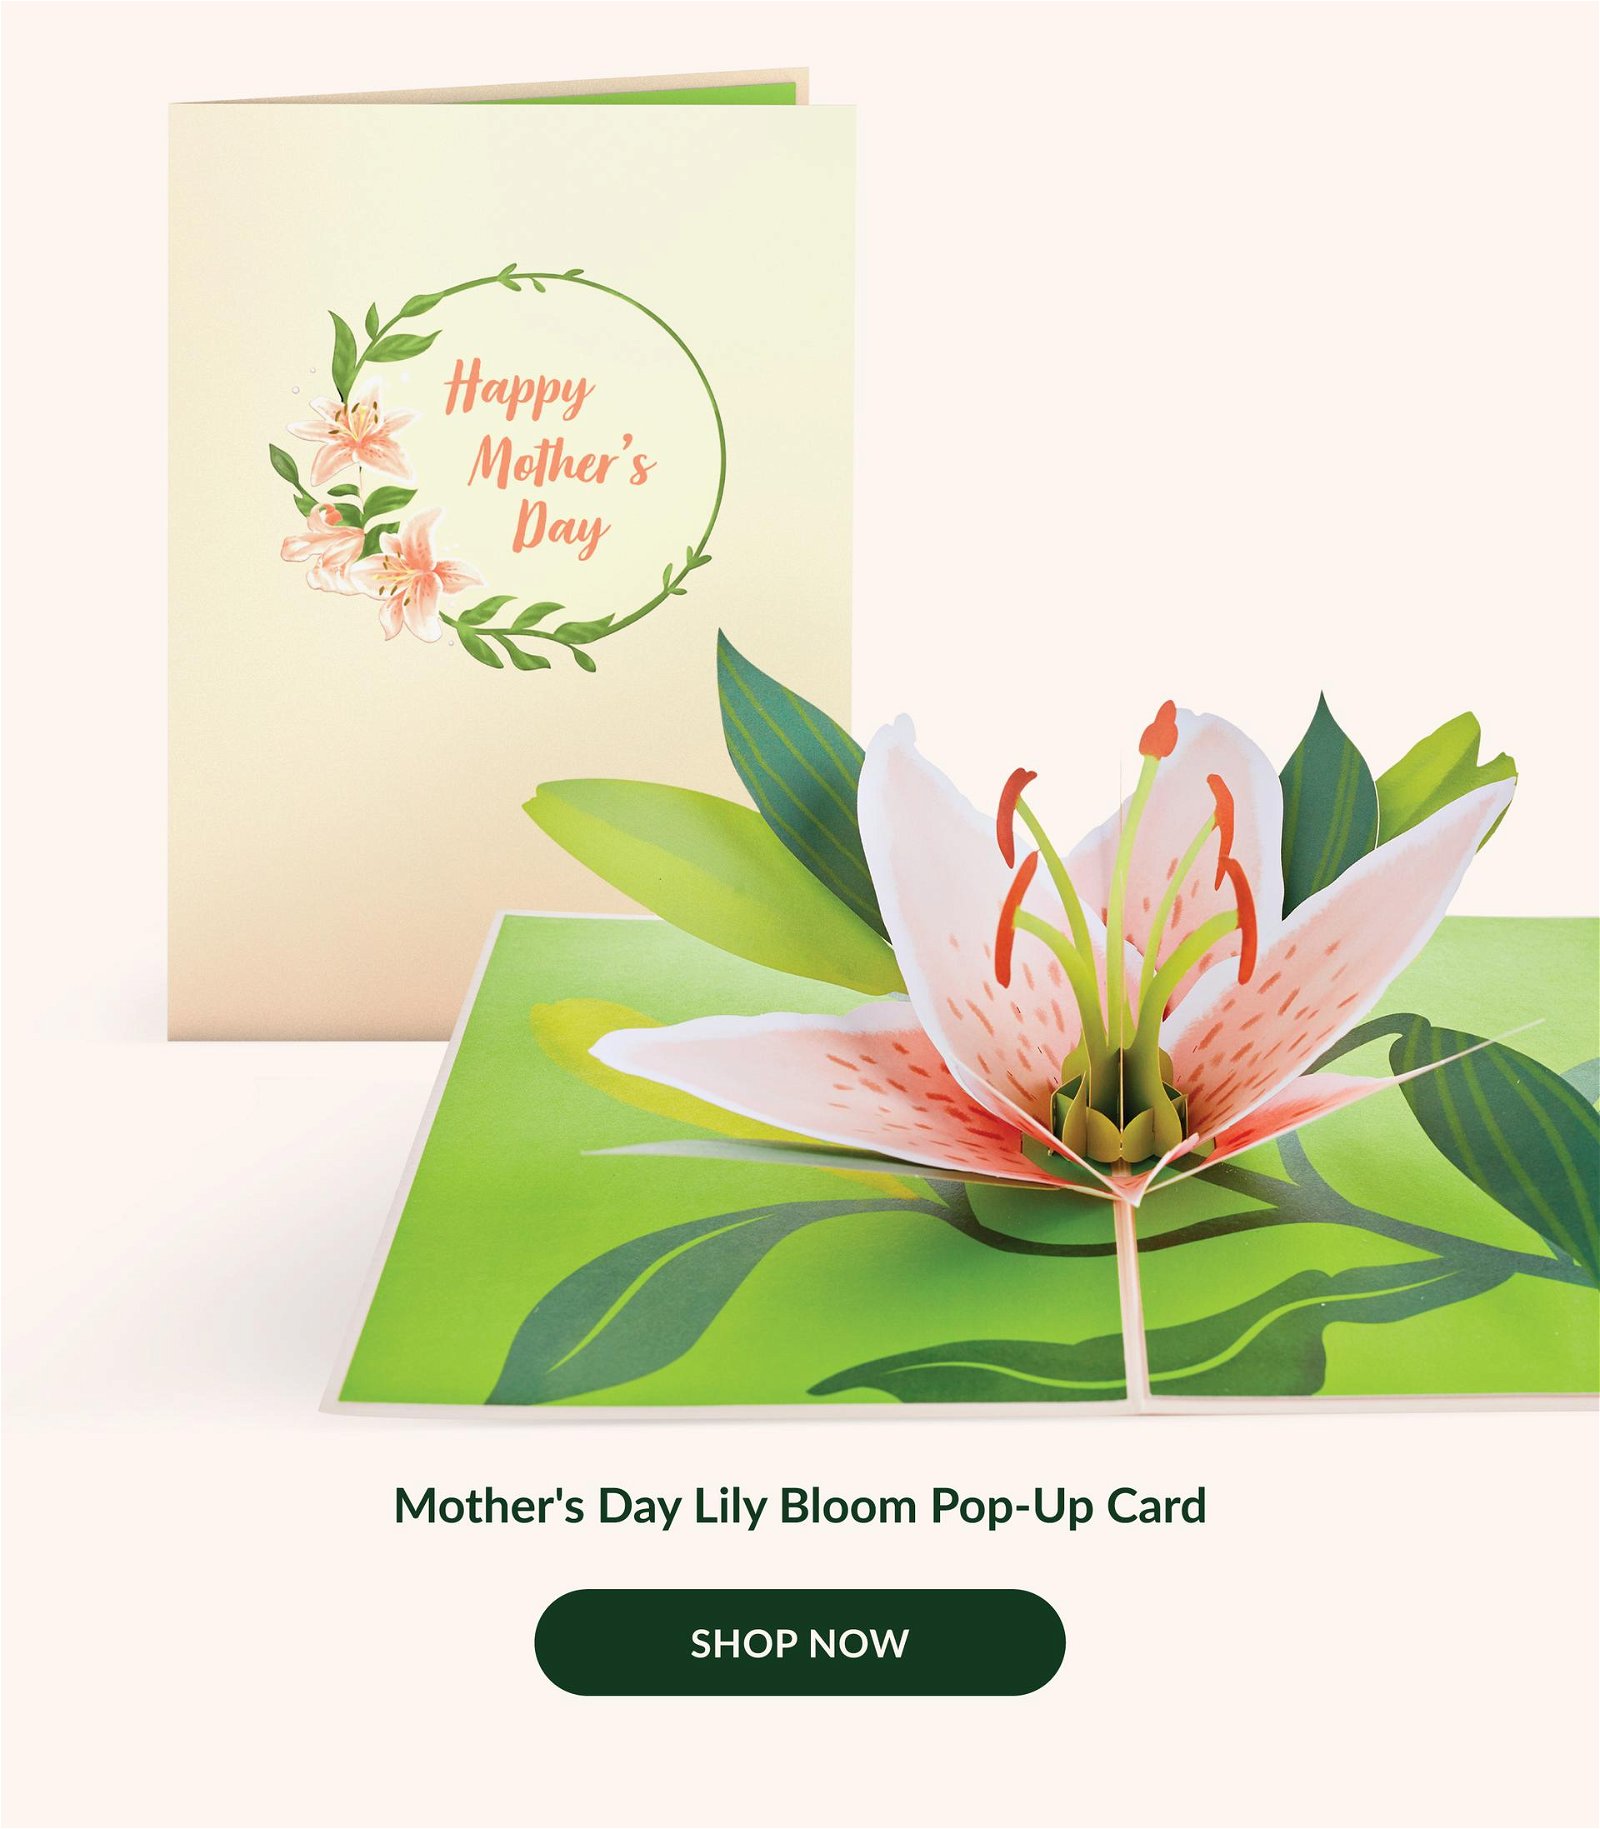 Mother's Day Lily Bloom Pop-Up Card | SHOP NOW